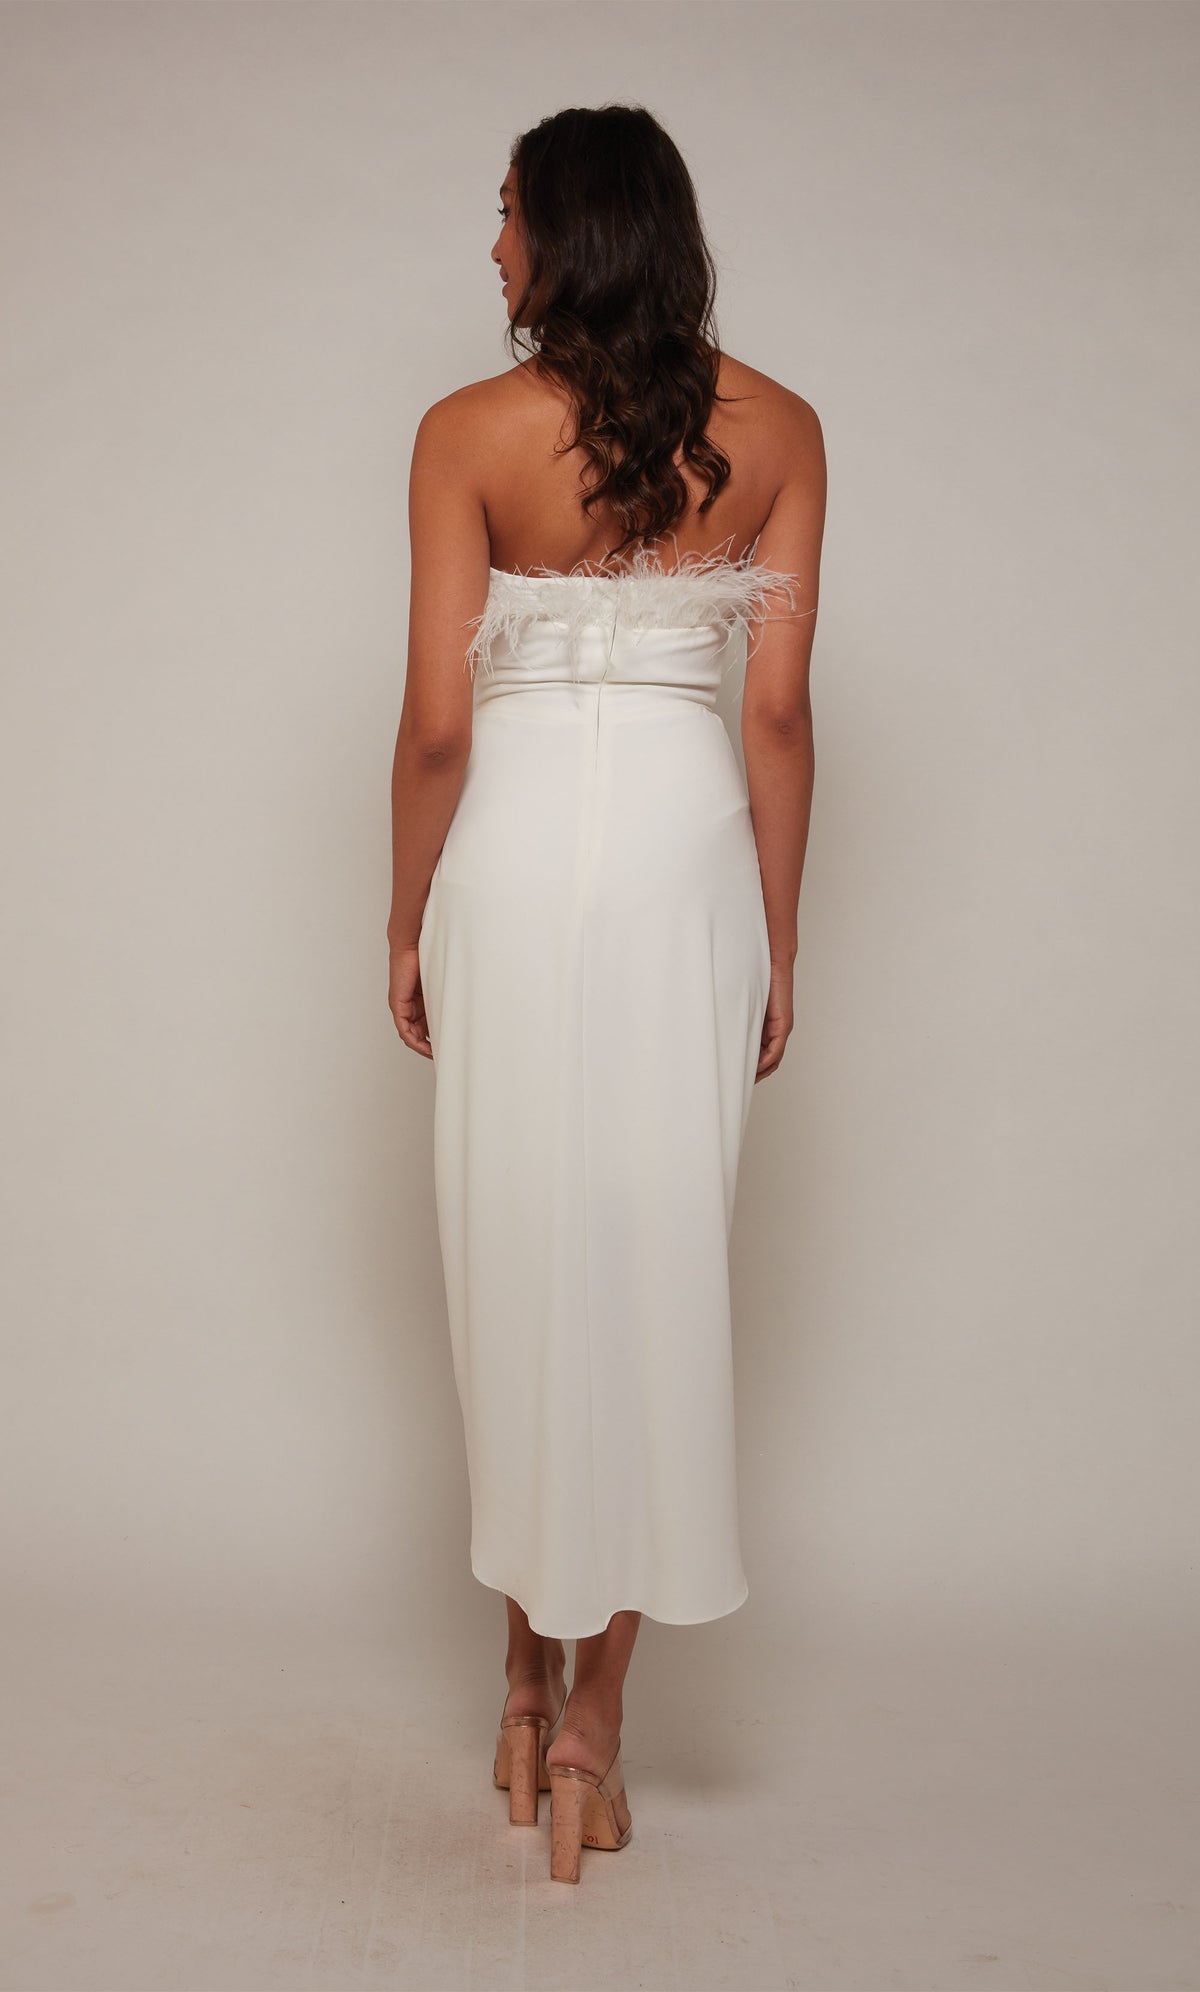 An ivory colored asymmetrical hemline dress  with a strapless neckline, feather trim, and a zip-up back.